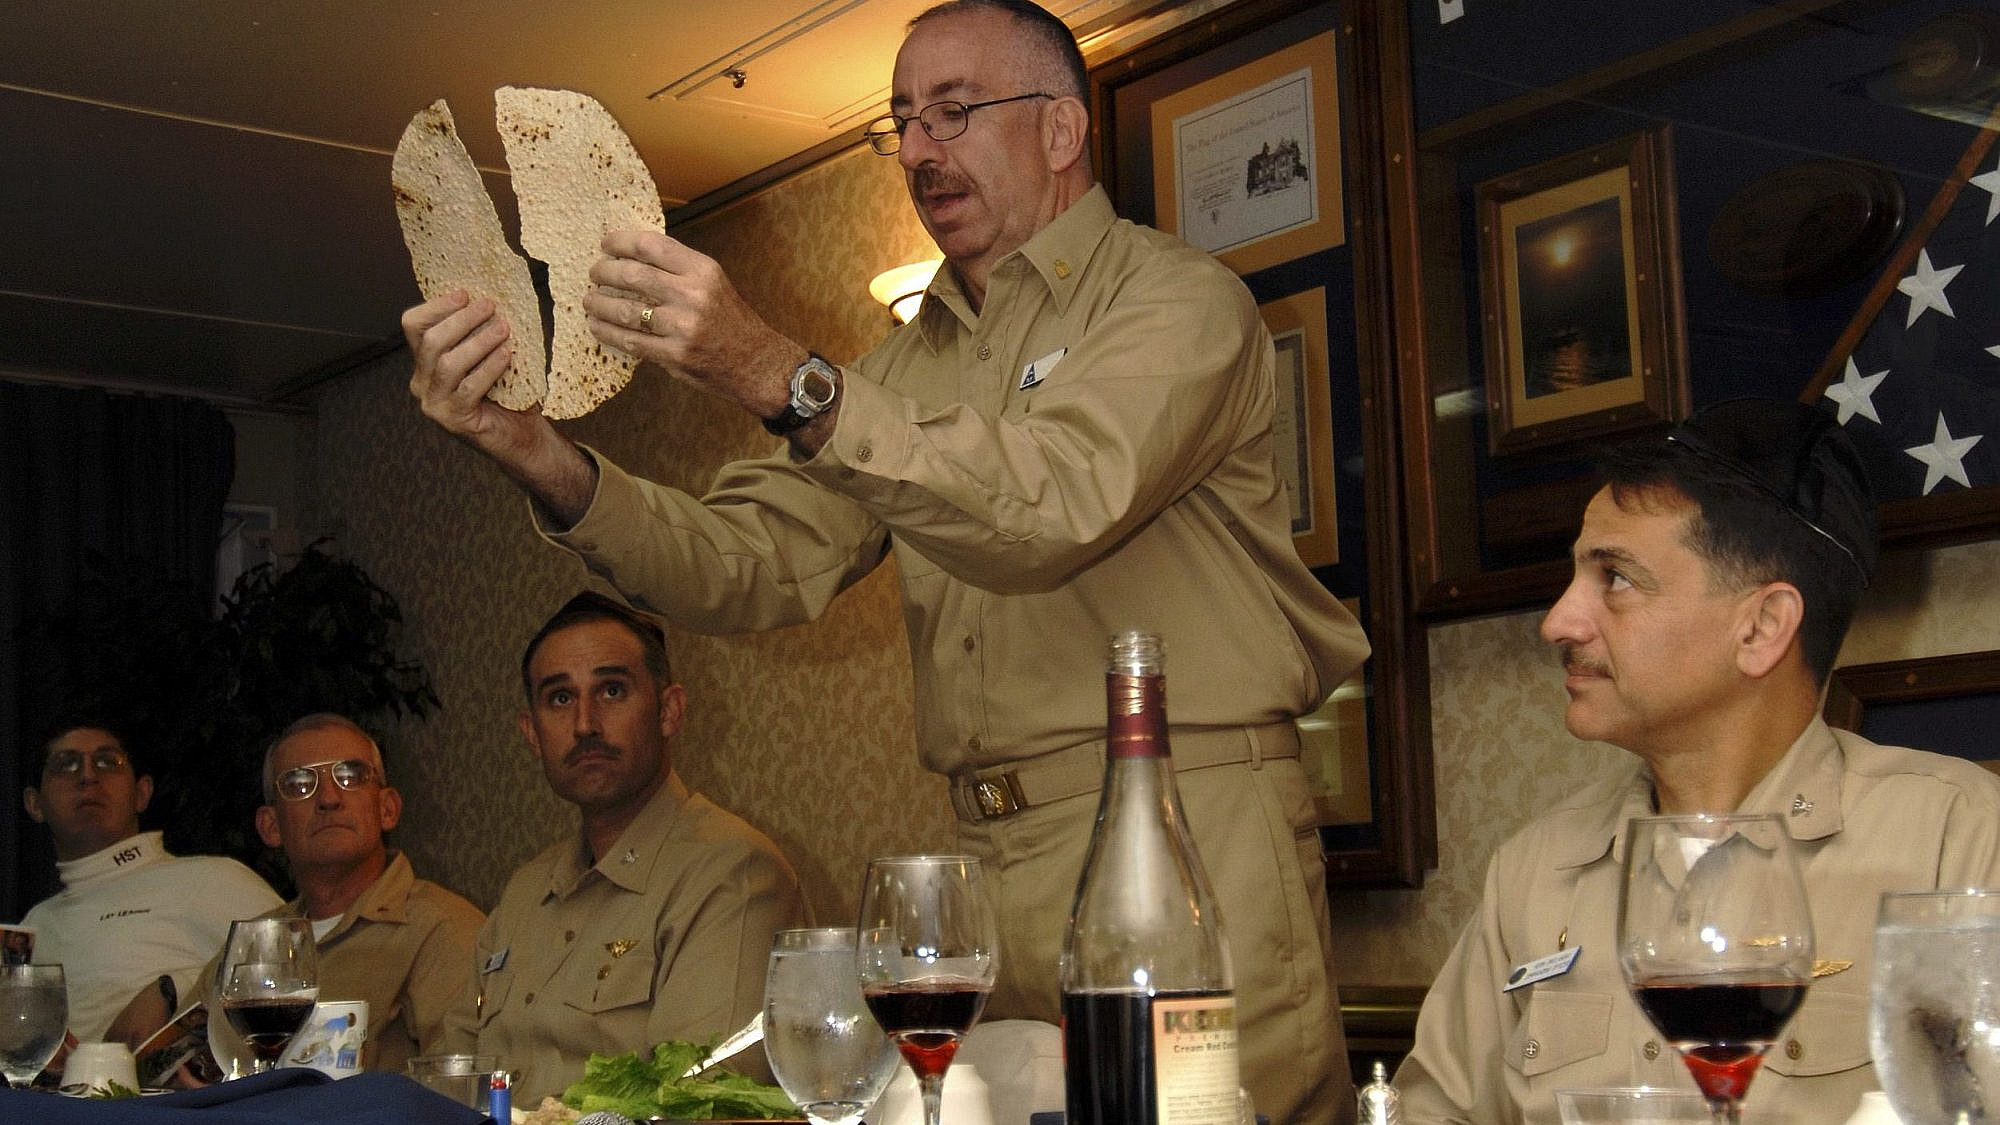 Herman “Herm” Shelanski (far right), then skipper of the squadron on the “USS John C. Stennis,” celebrating Passover in 2008 on the ship with chaplain Rabbi Irving Elson (holding matzah) and executive officer Capt. Ron Reis (next to the left). Credit: Courtesy of Vice Adm. (Ret.) Herman Shelanski.